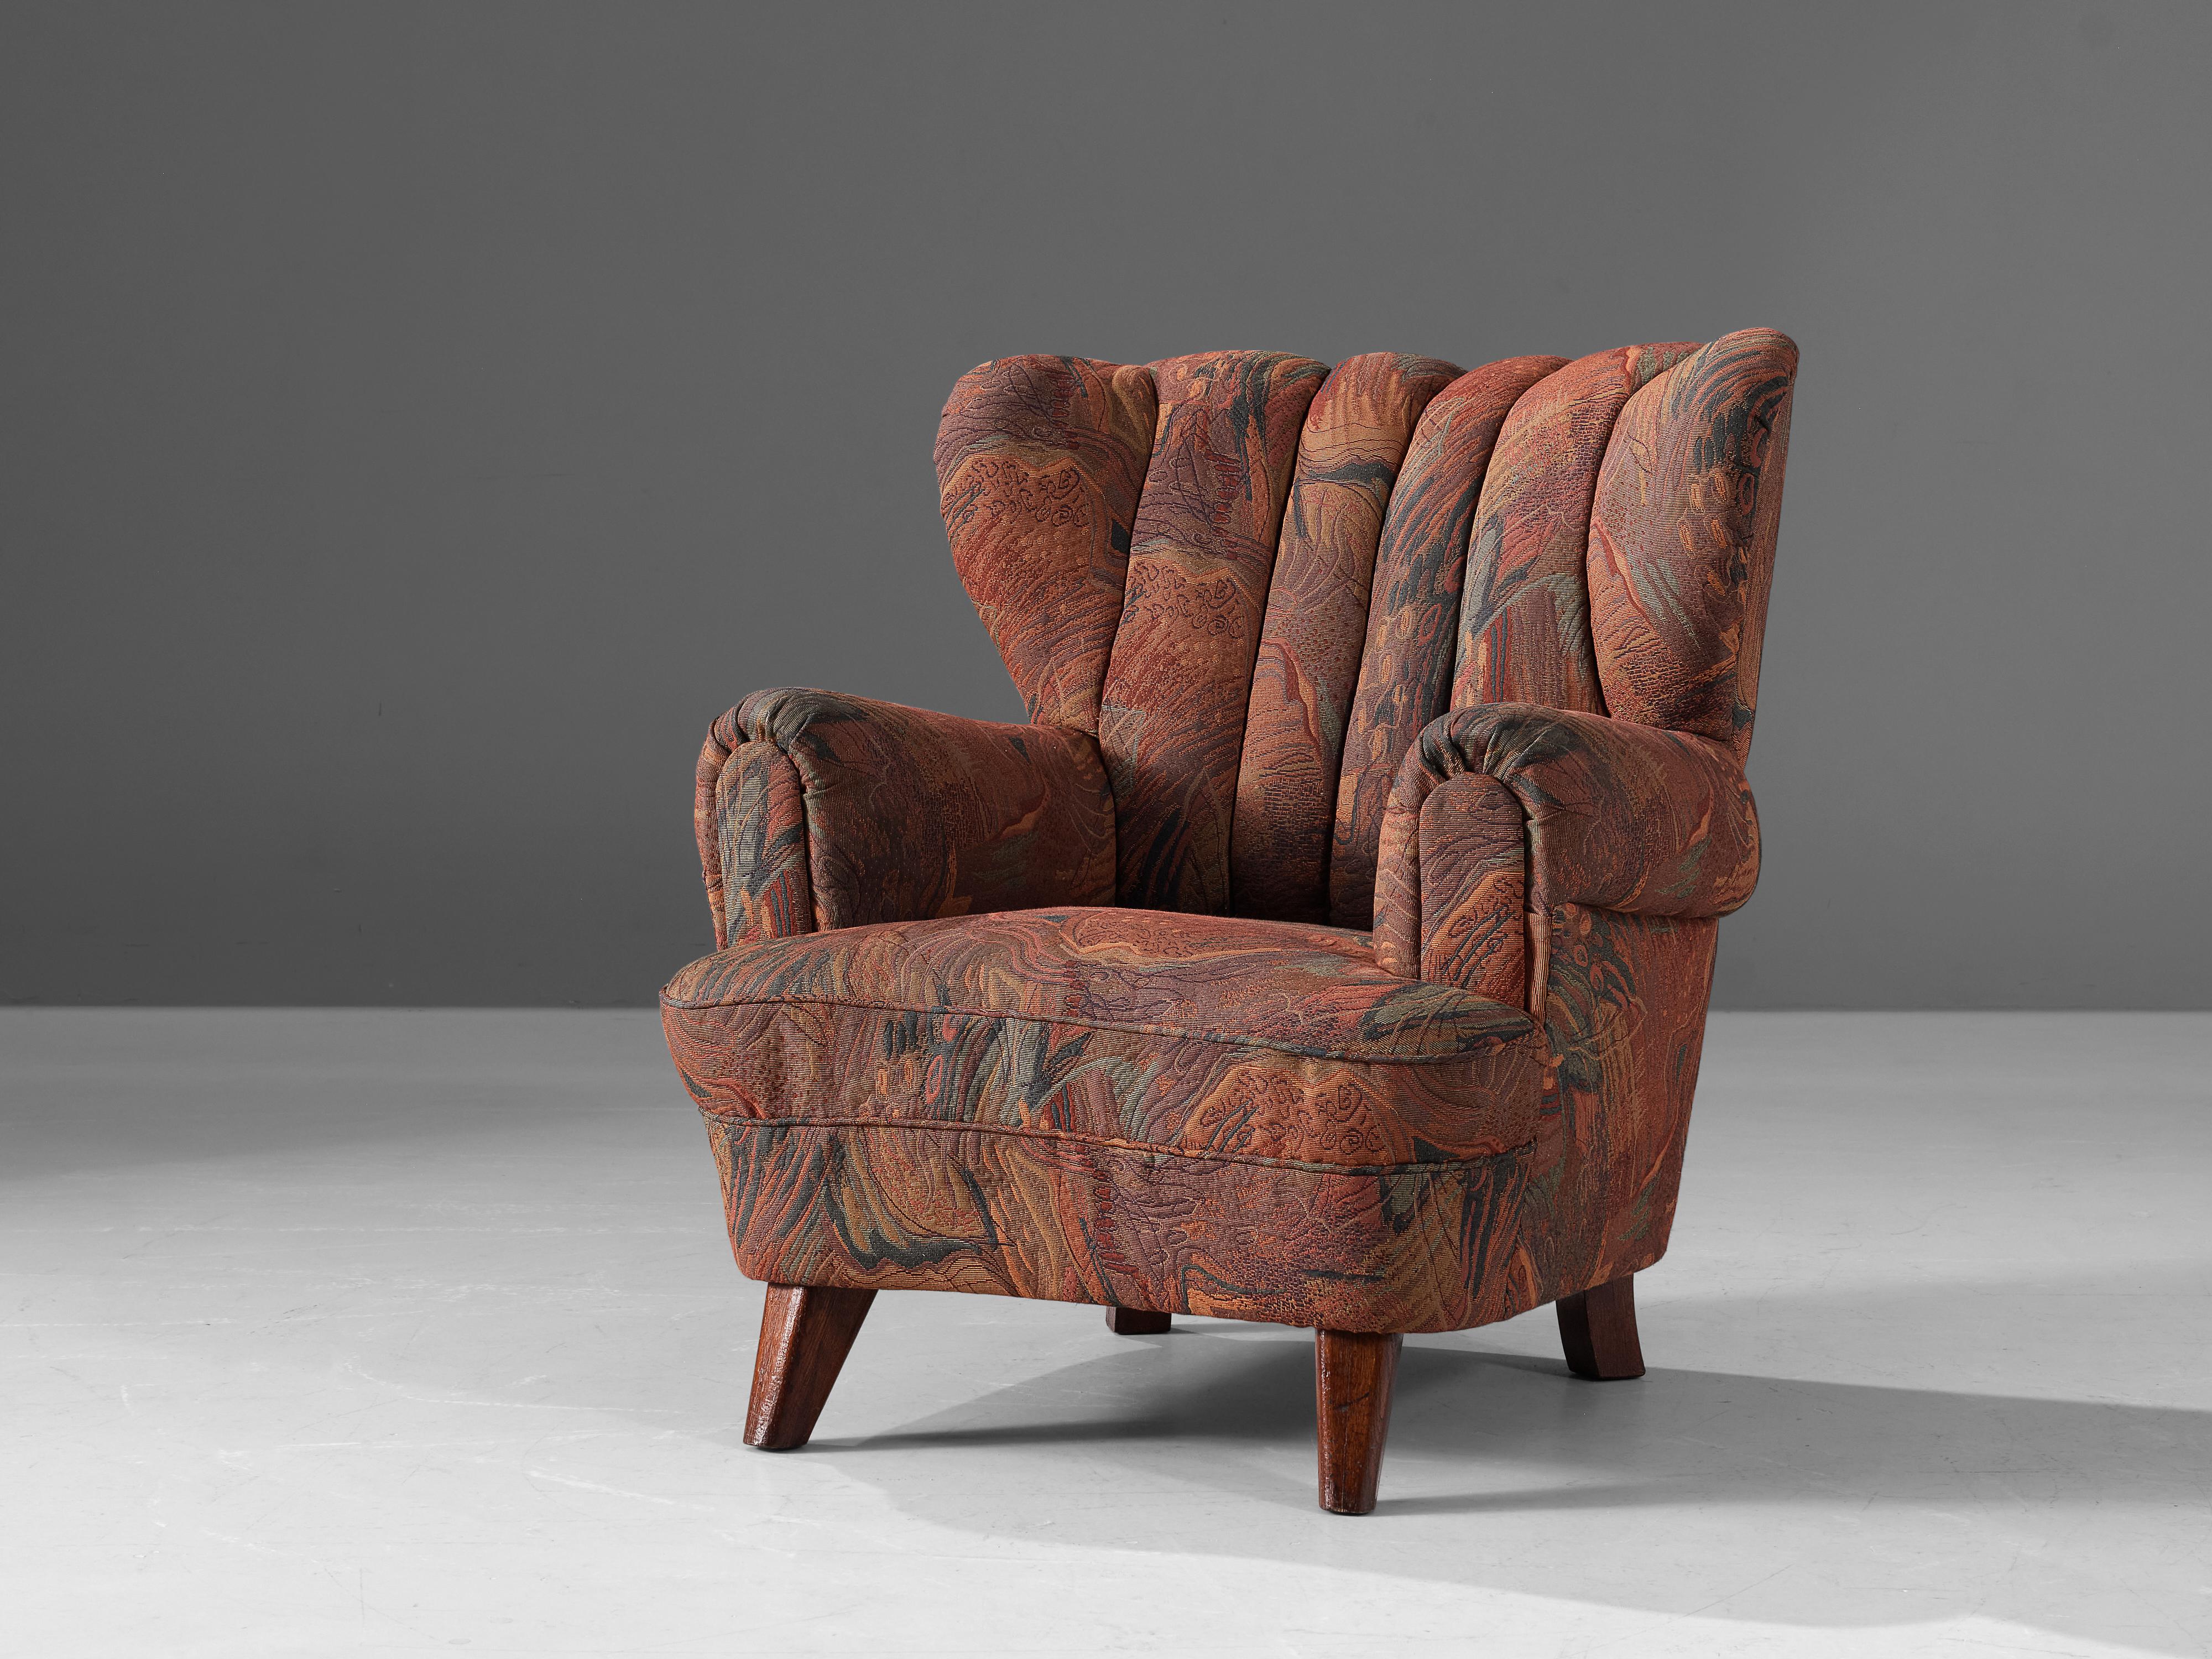 Easy chair, fabric, wood, Denmark, 1950s

This lovely and comfortable Danish chair features wings and curved armrests. Thanks to its voluptuous armrests and seating, the chair gets a characteristic, visually interesting shape. This is emphasized by